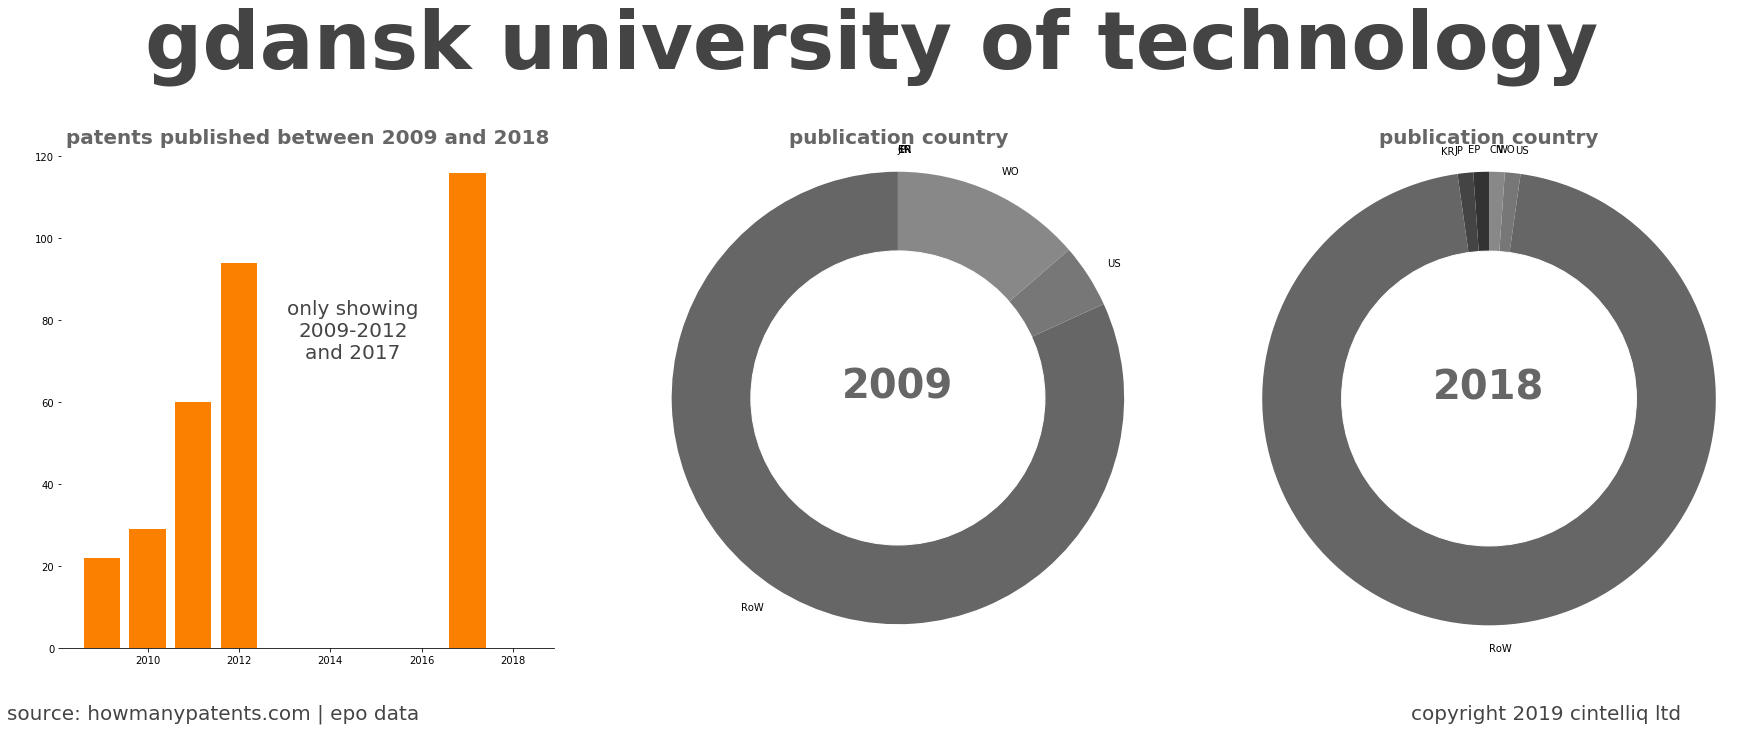 summary of patents for Gdansk University Of Technology